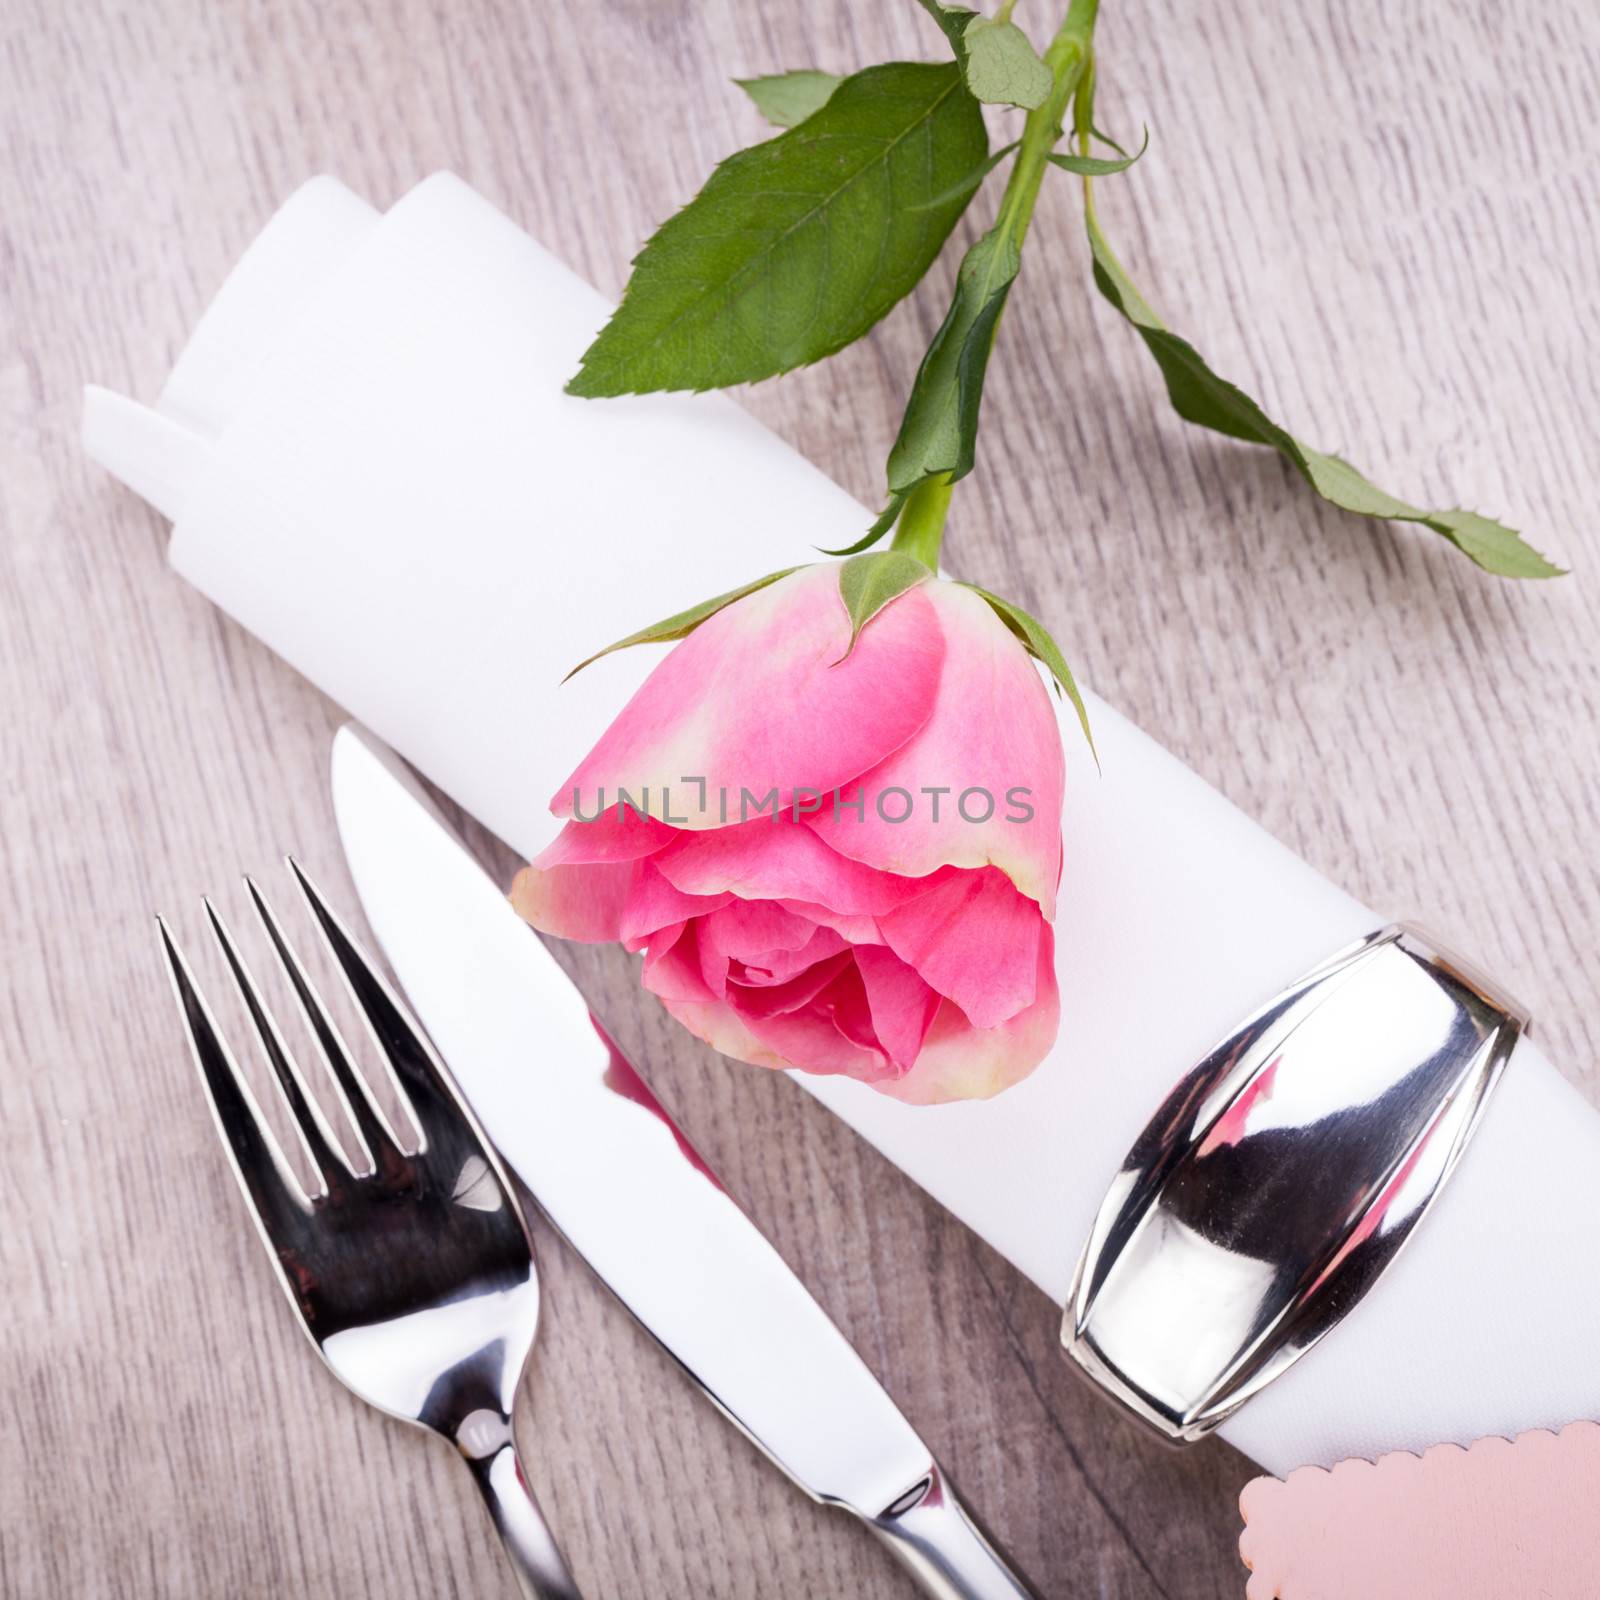 Romantic formal elegant table setting with a single pink rose and decorative ribbon for a sweetheart on Valentines Day